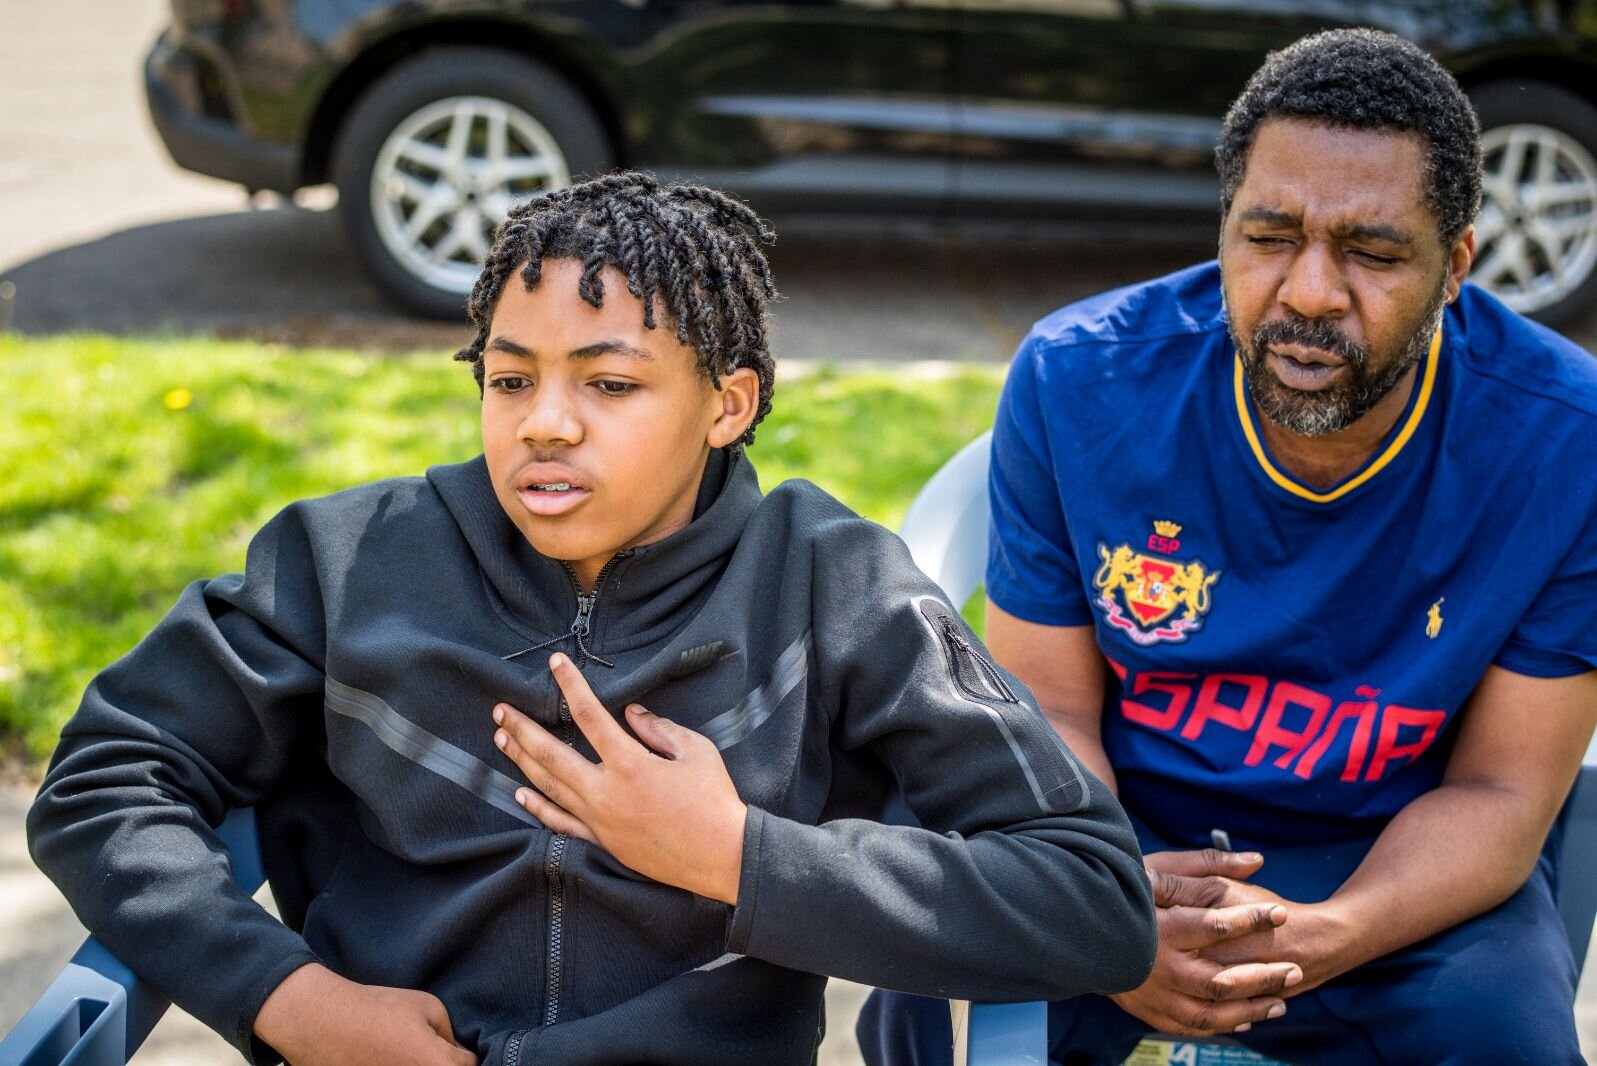 When DJ Hemphill was 9, the police sought him out because he had been in a fight. This event inspired his family to get involved in juvenile justice reform.